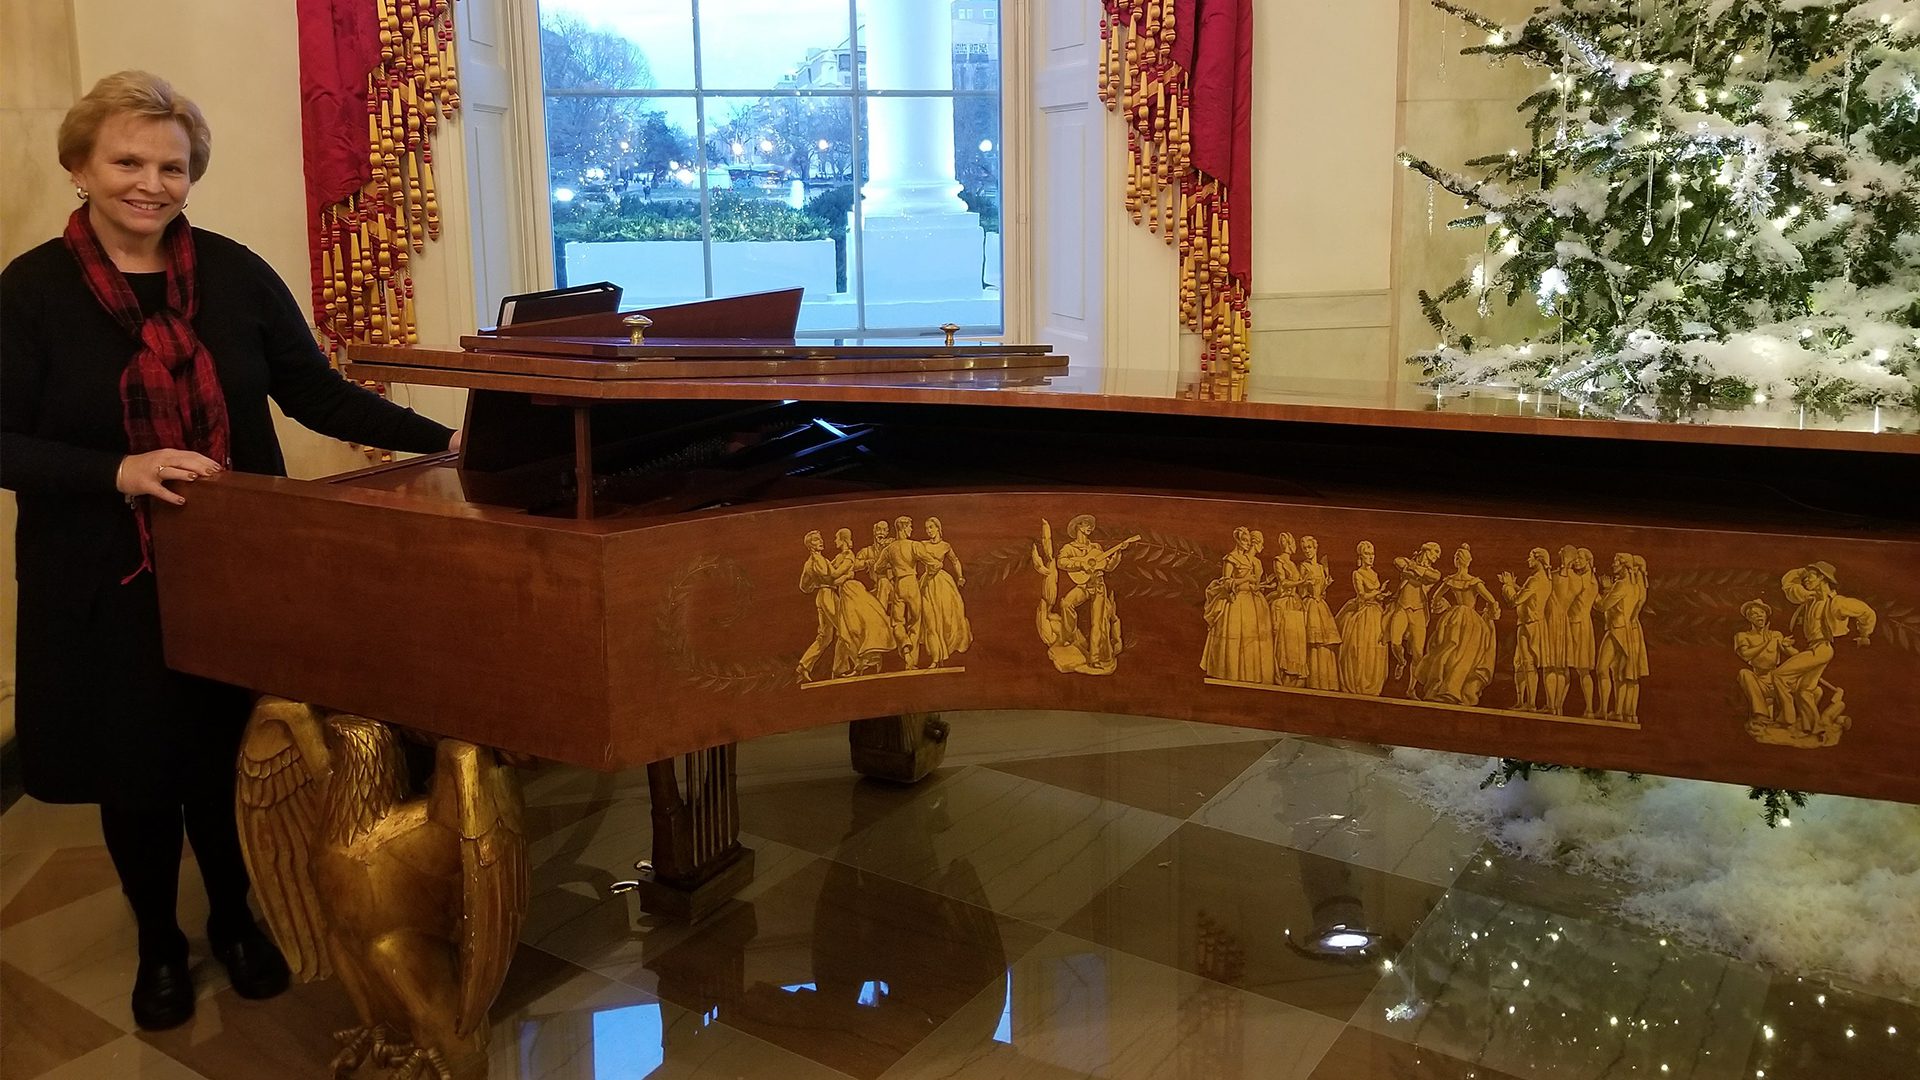 Berta played this Steinway Grand Piano presented to President Franklin D. Roosevelt in 1938 on a TCA Chorus trip to the Whitehouse in December 2017. 